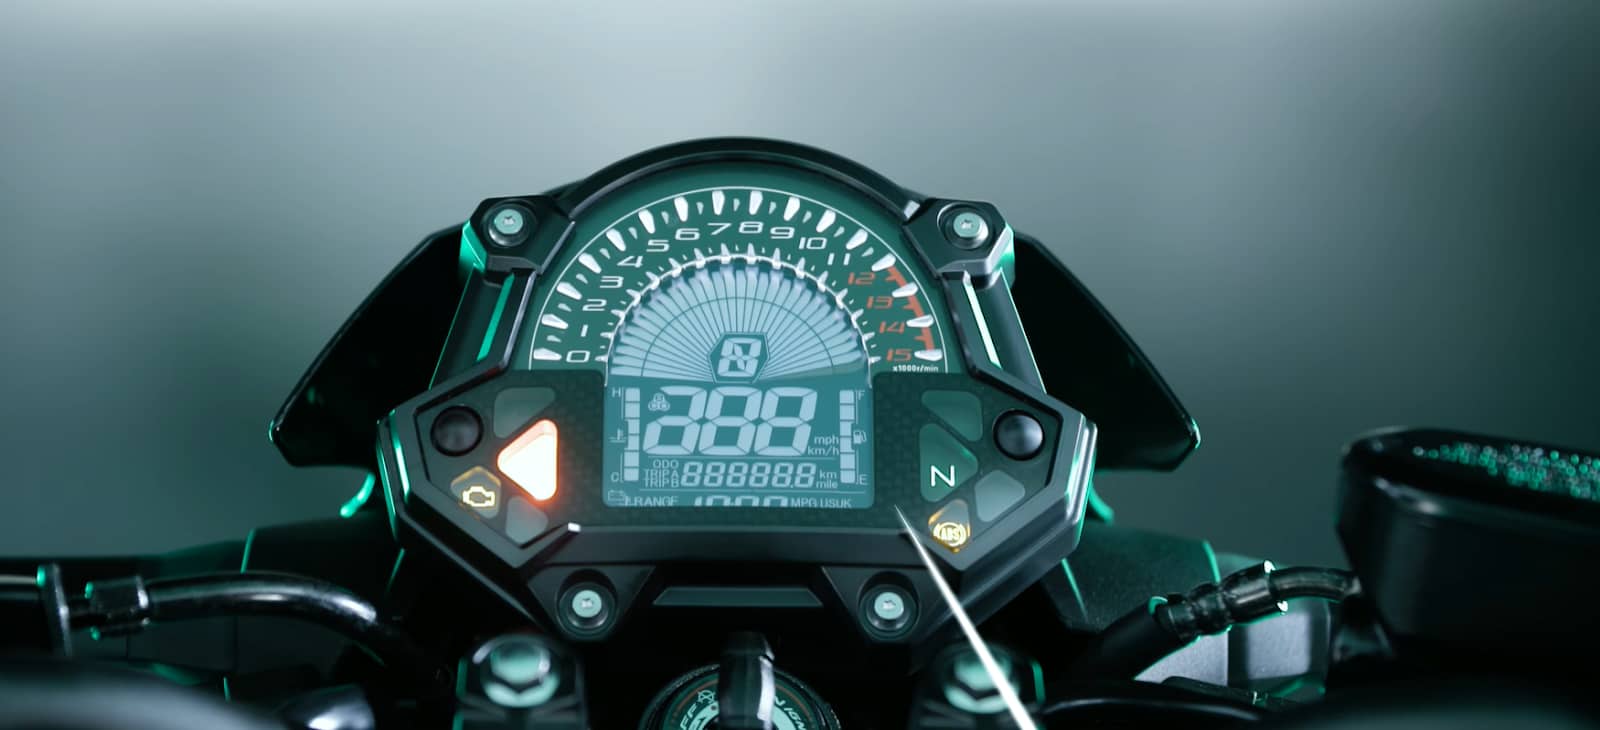 Motorcycle dashboard illuminated with a digital speedometer and various indicators